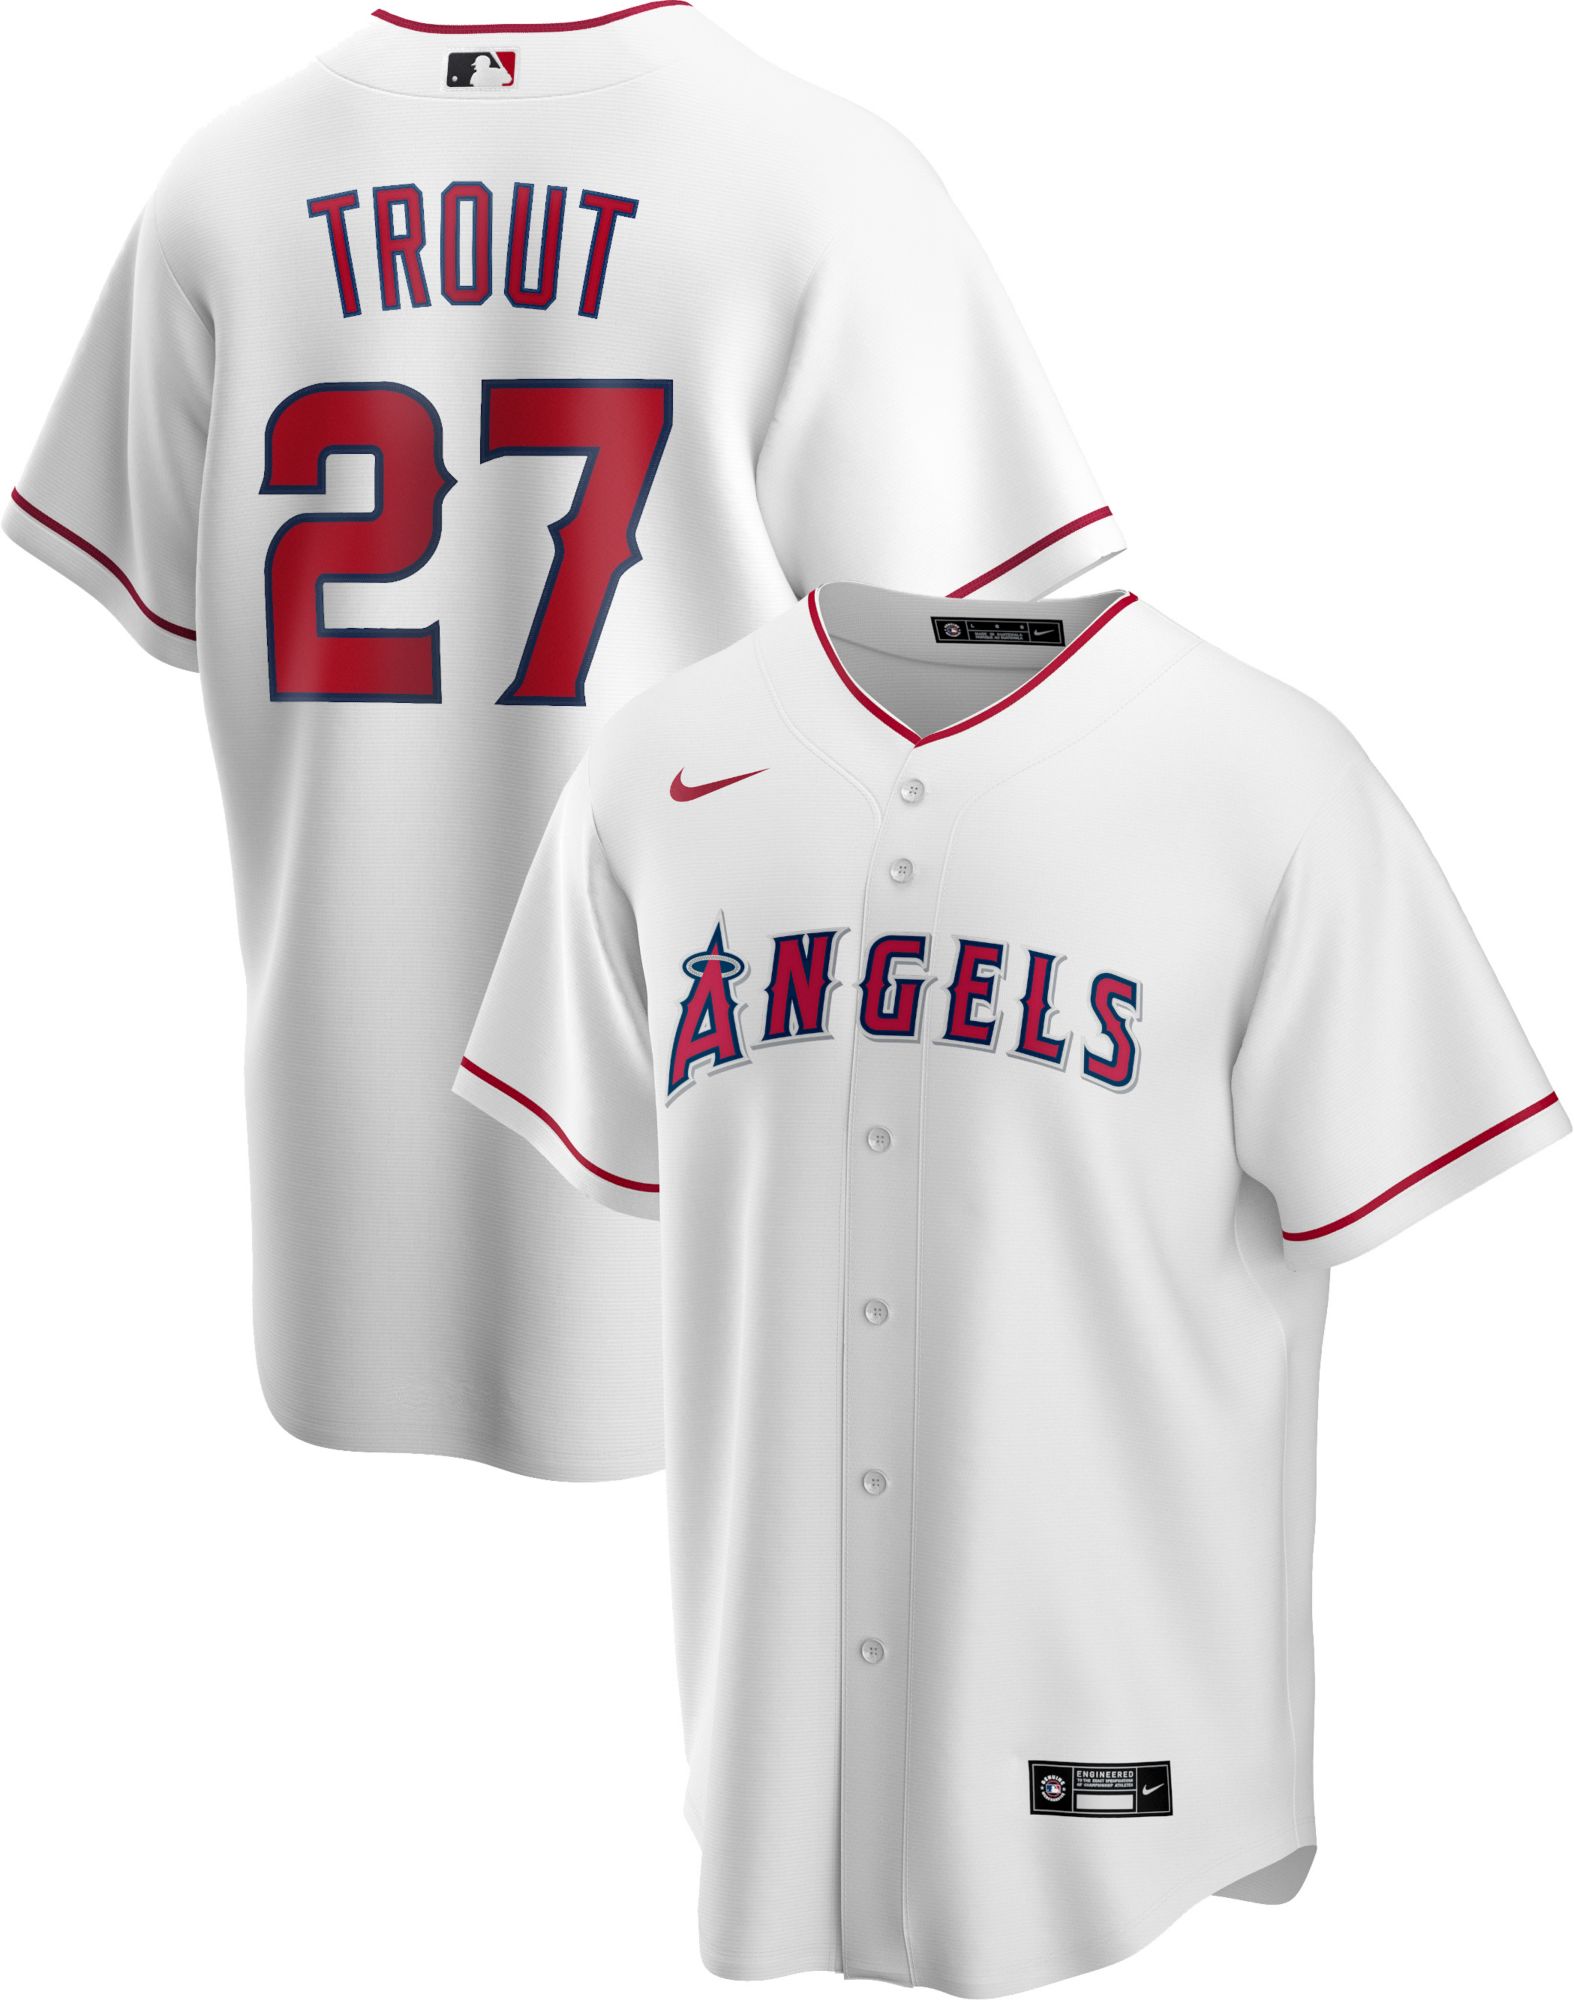 7 angels jersey